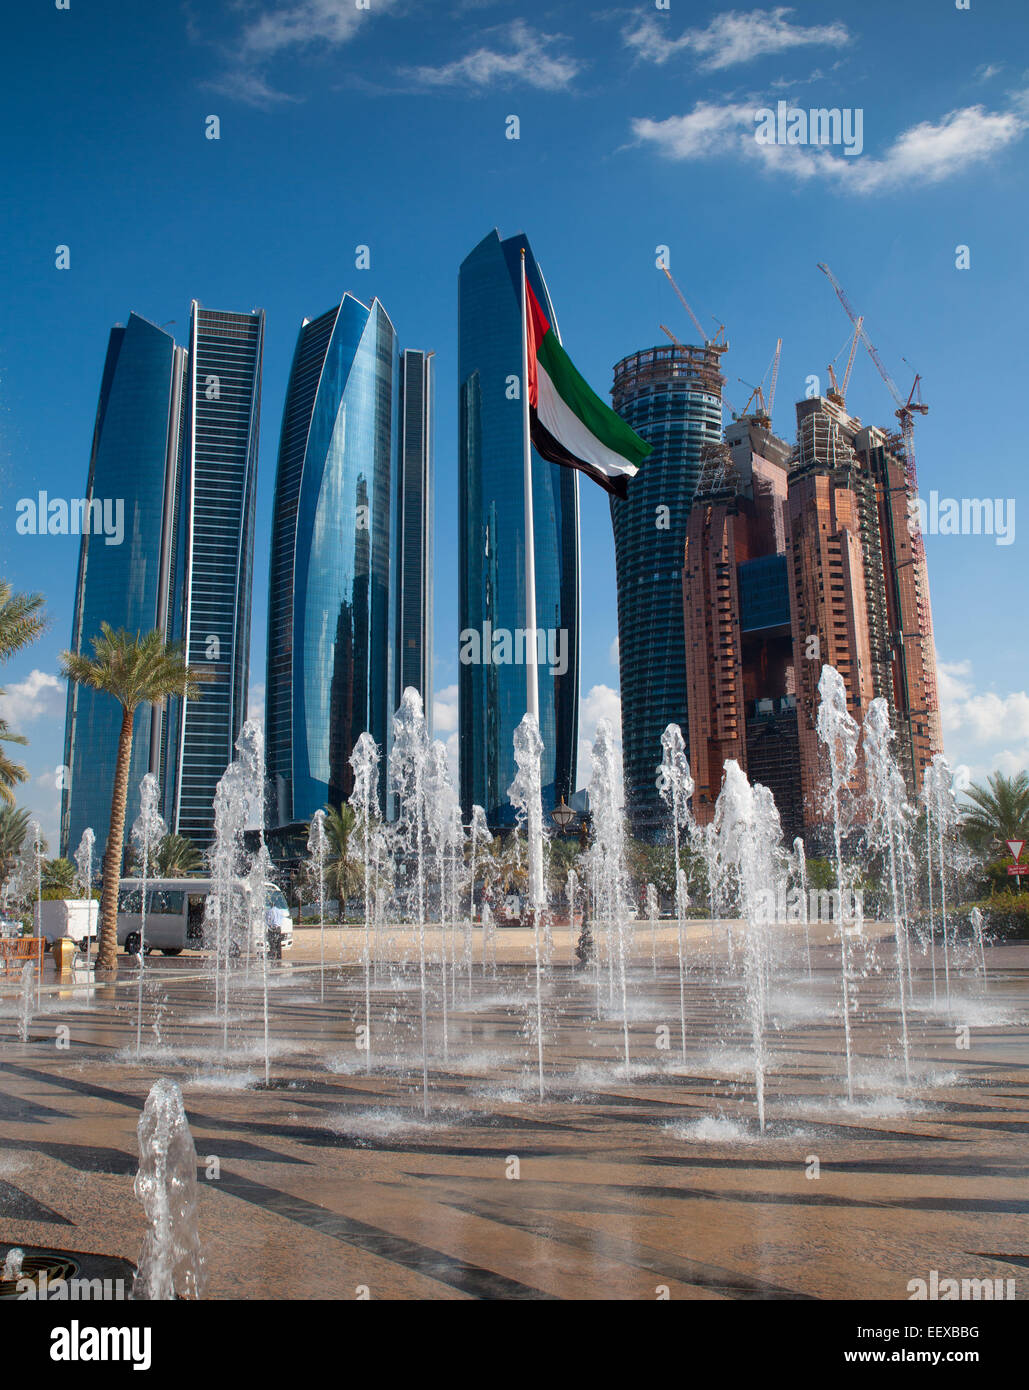 Skyscrapers of modern Abu Dhabi, capital of United Arab Emirates. Fountains and UAE flag at foreground. City at background. Stock Photo